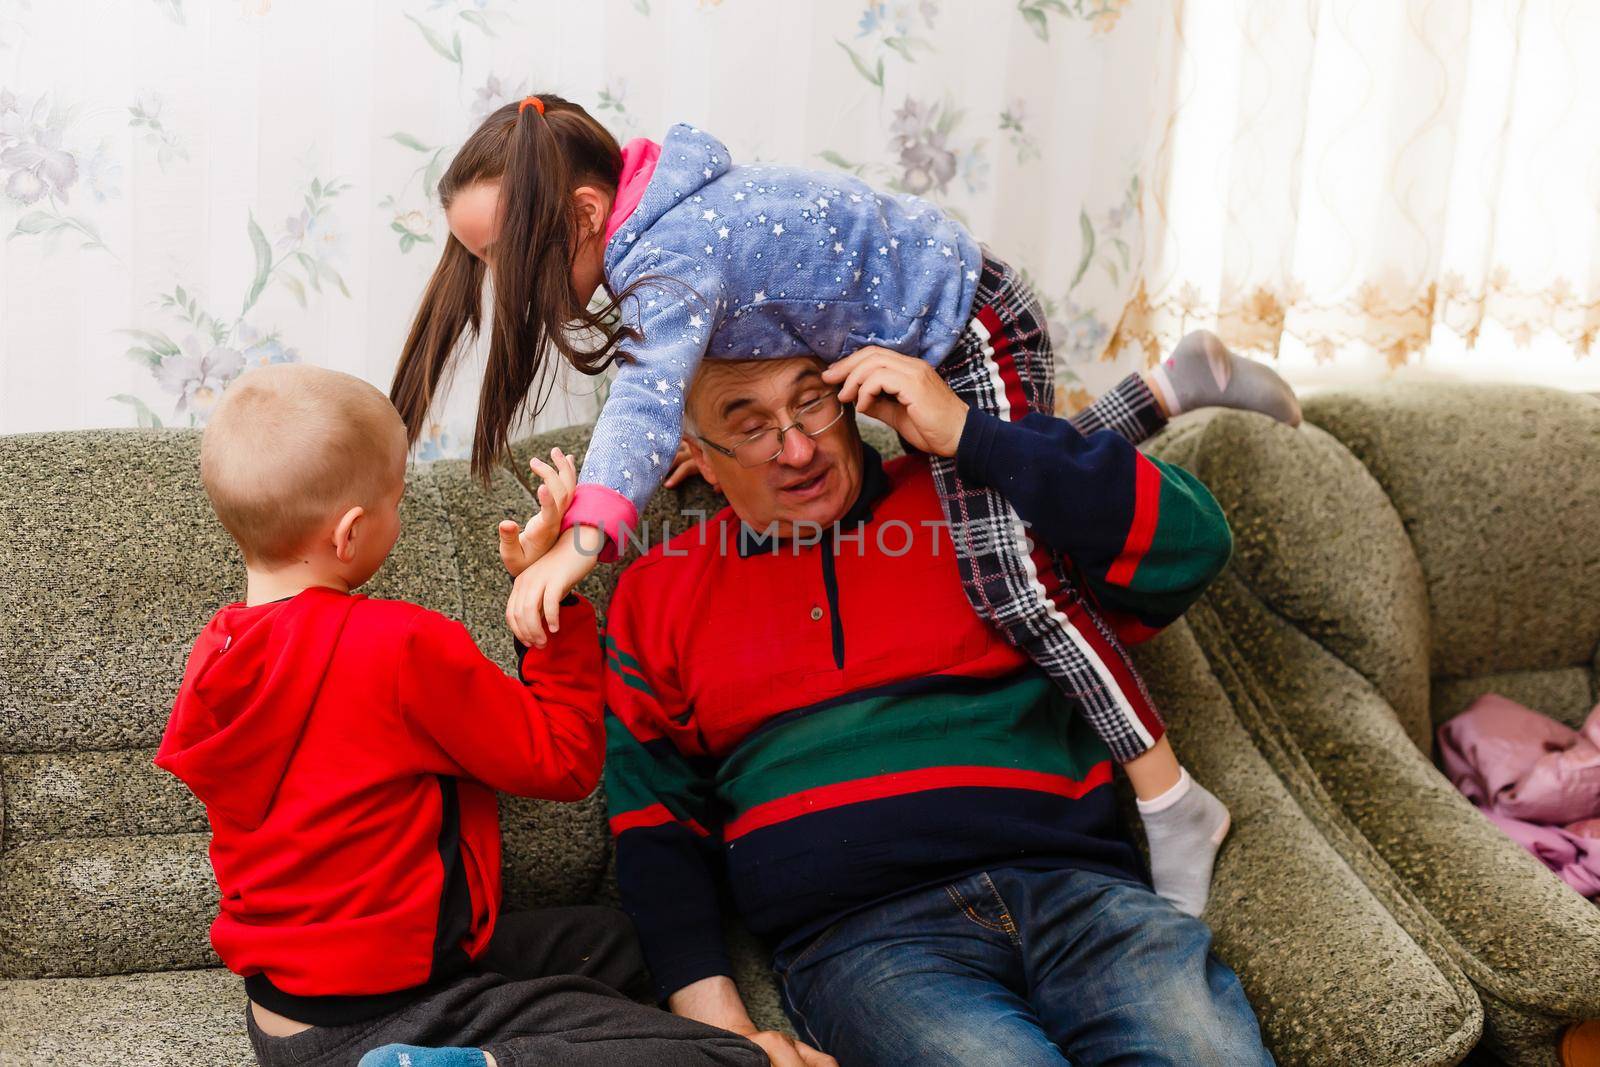 grandfather spends time with grandchildren in the living room